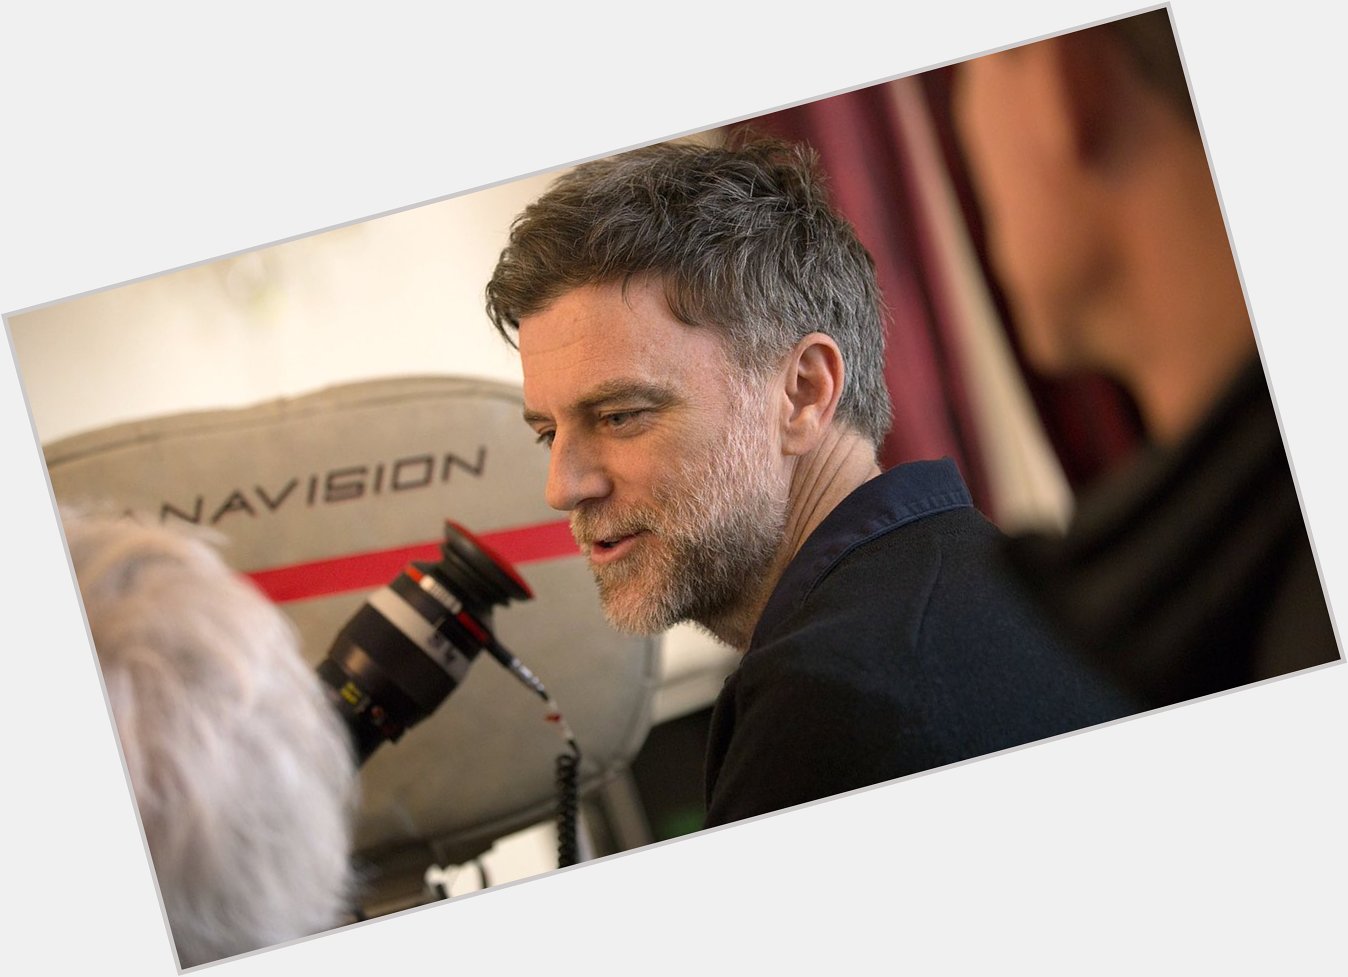 Happy birthday to my favourite filmmaker - the always fascinating, endlessly inspiring Paul Thomas Anderson. 